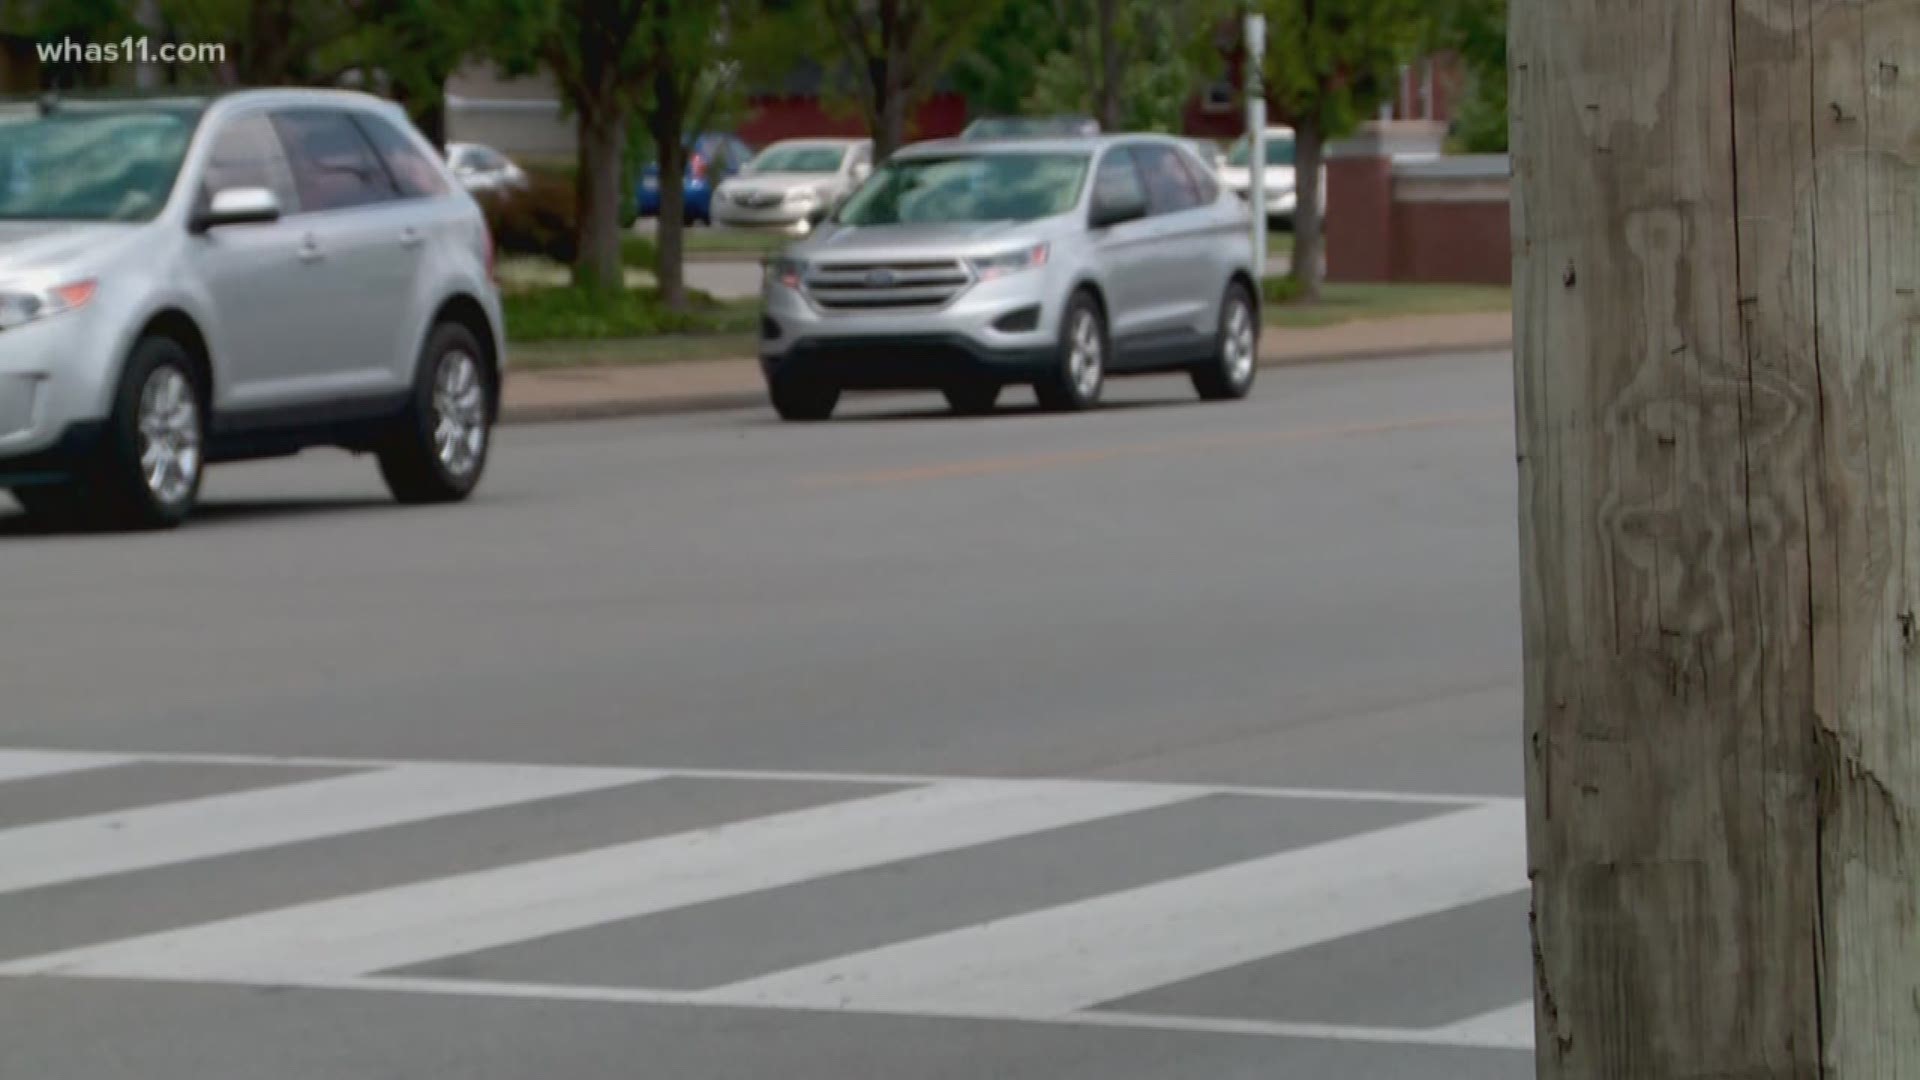 Louisville Metro Police announced they are pulling school crossing guards from a dozen local schools, and the first day is right around the corner.